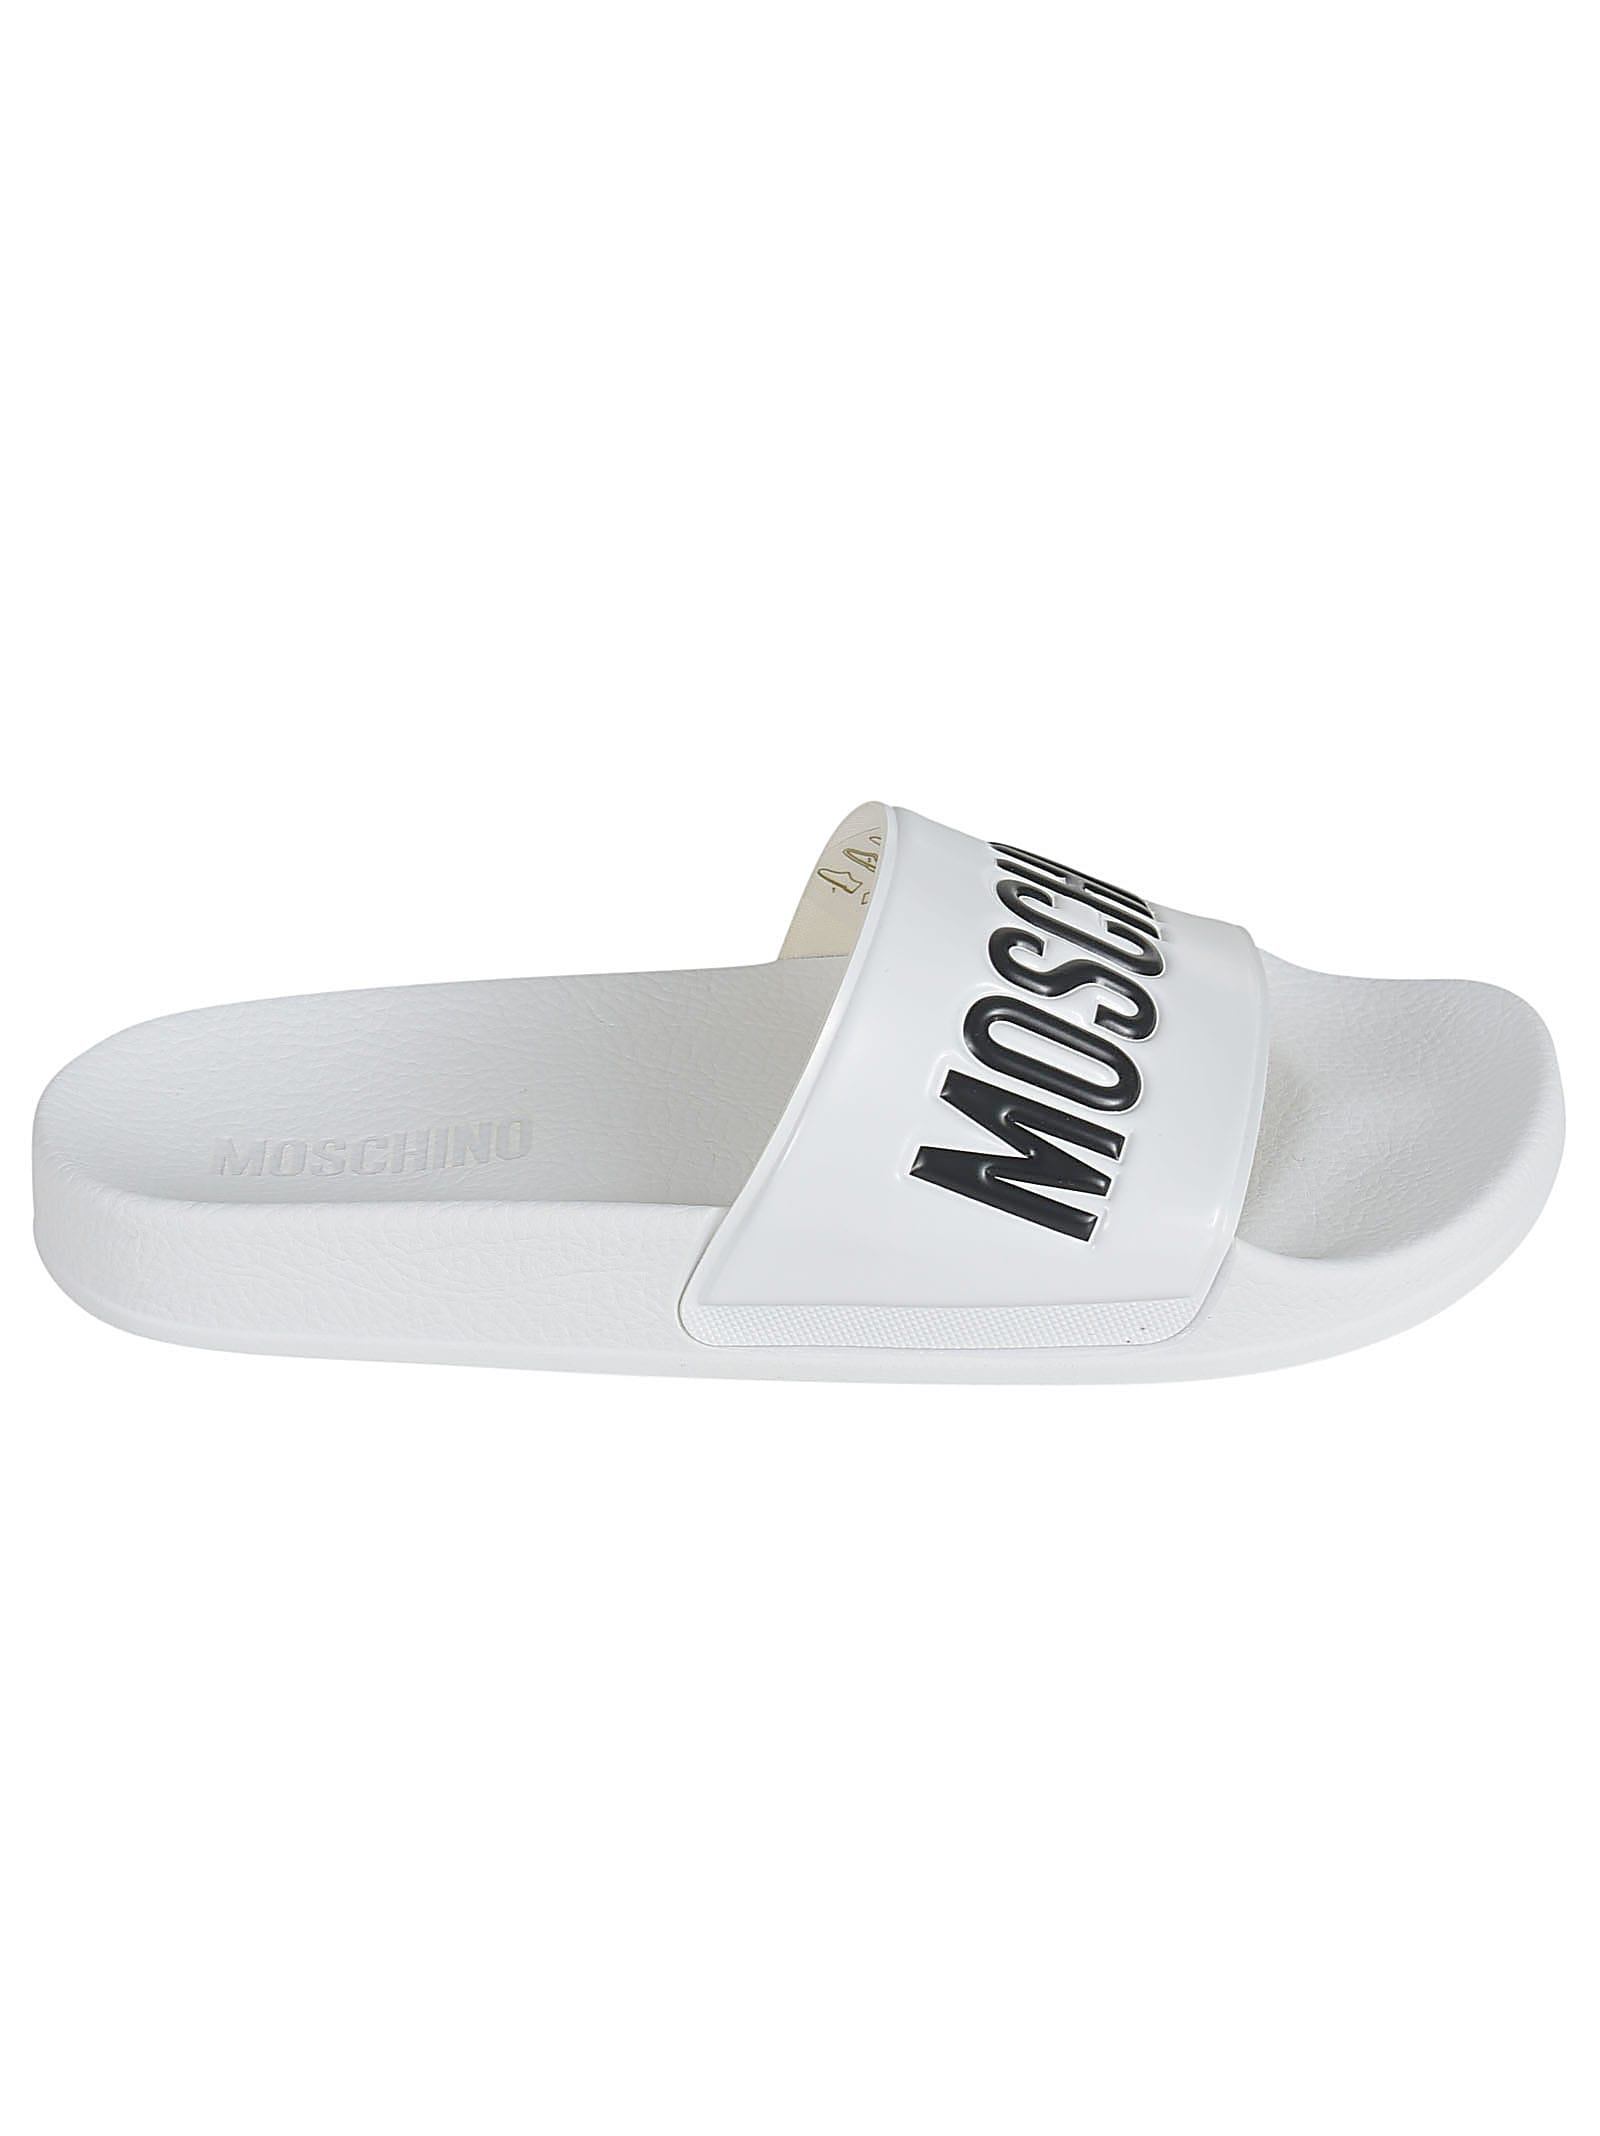 Buy Moschino Embossed Logo Sliders online, shop Moschino shoes with free shipping